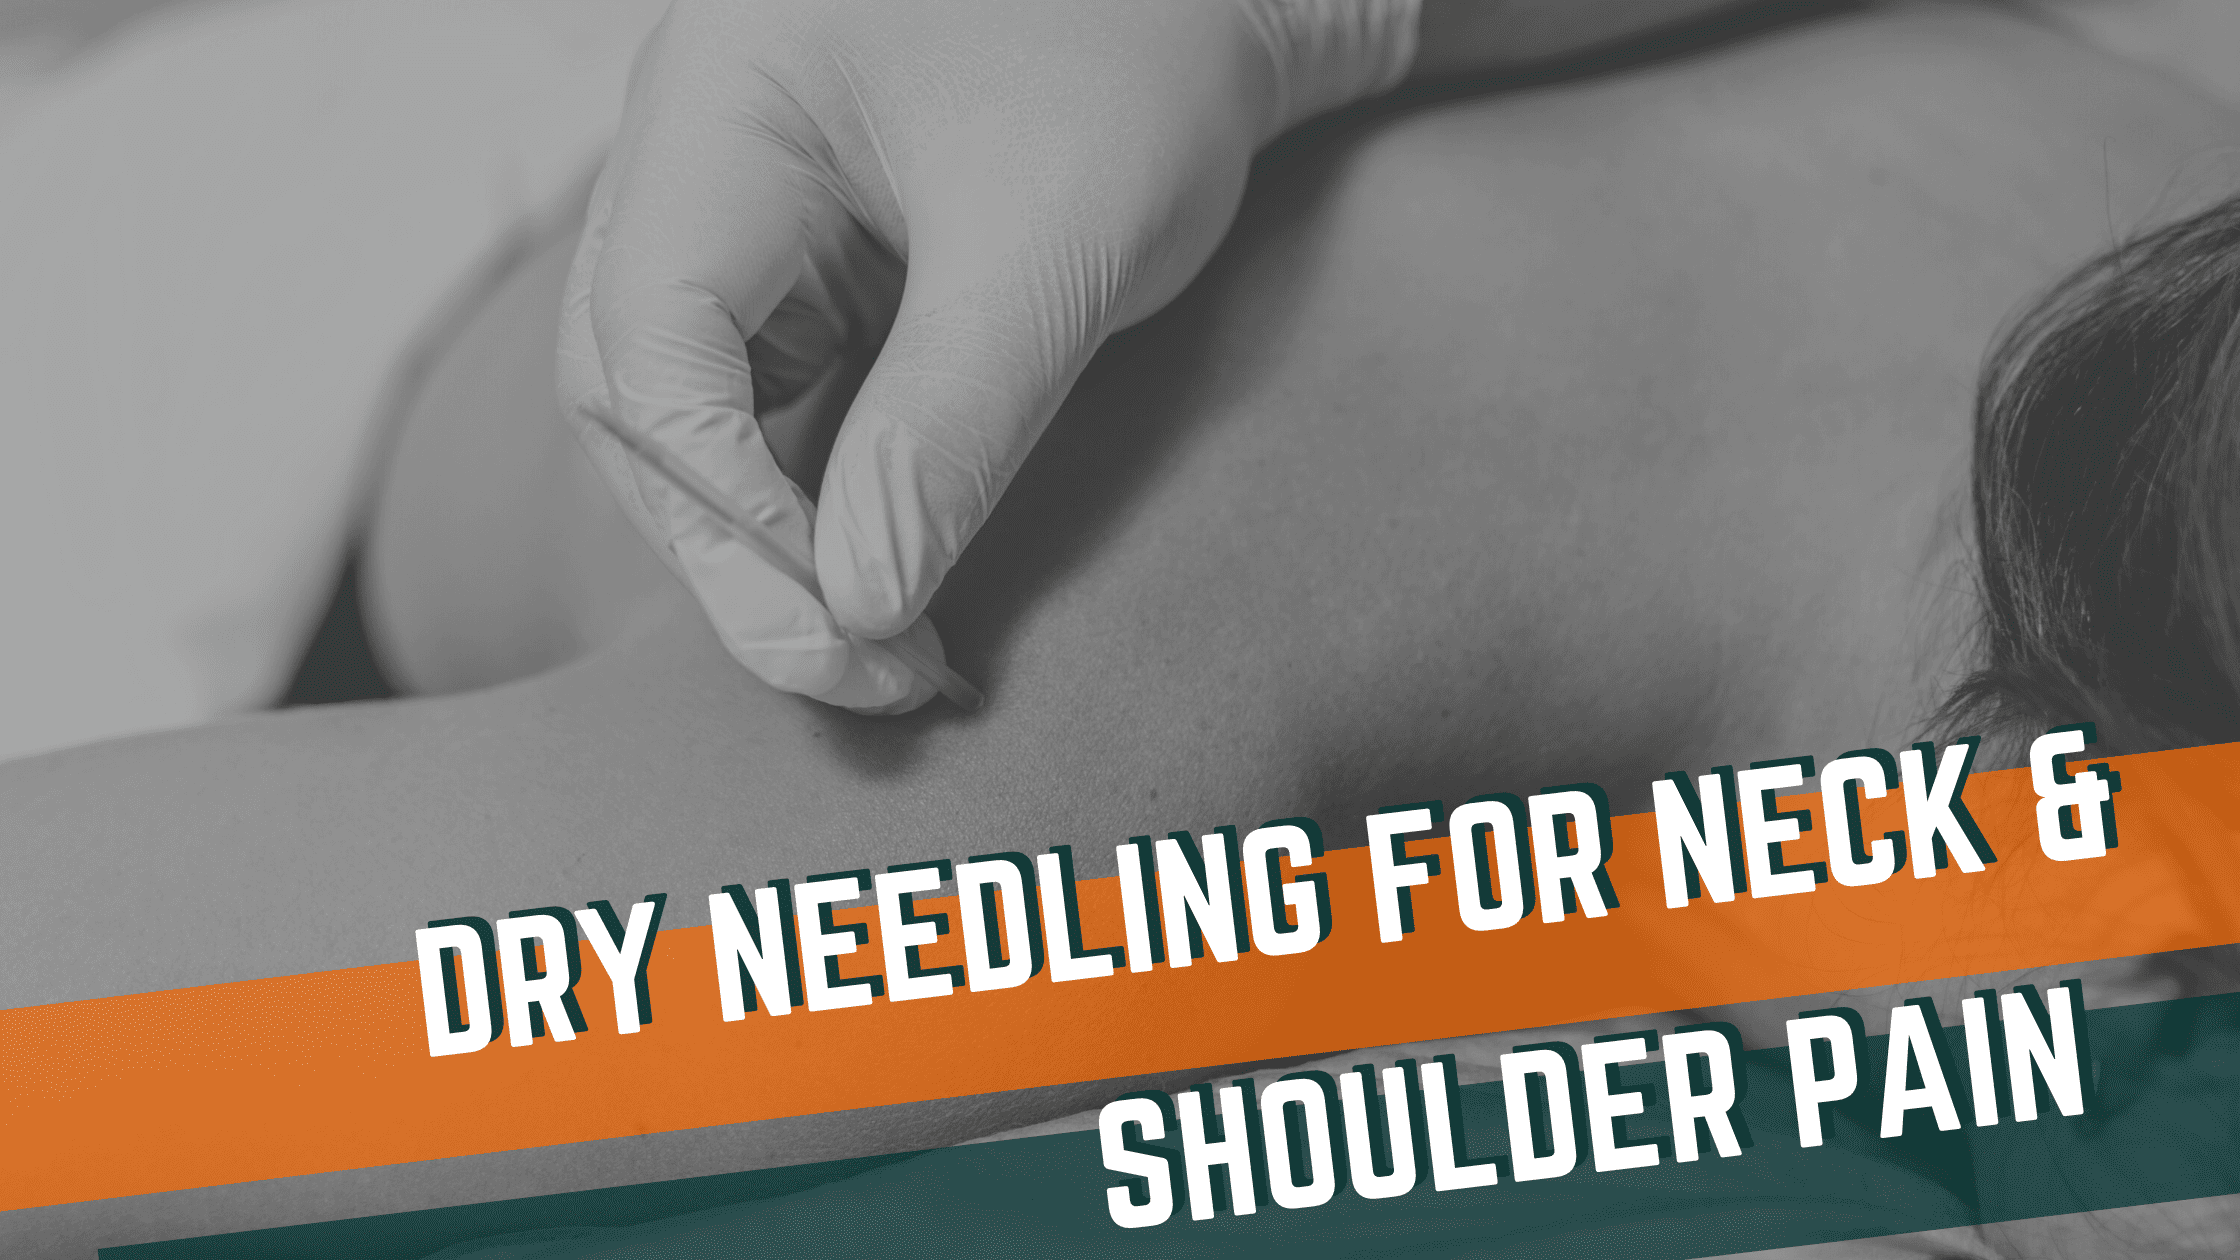 Featured image for “Dry Needling for Neck & Shoulder Pain”